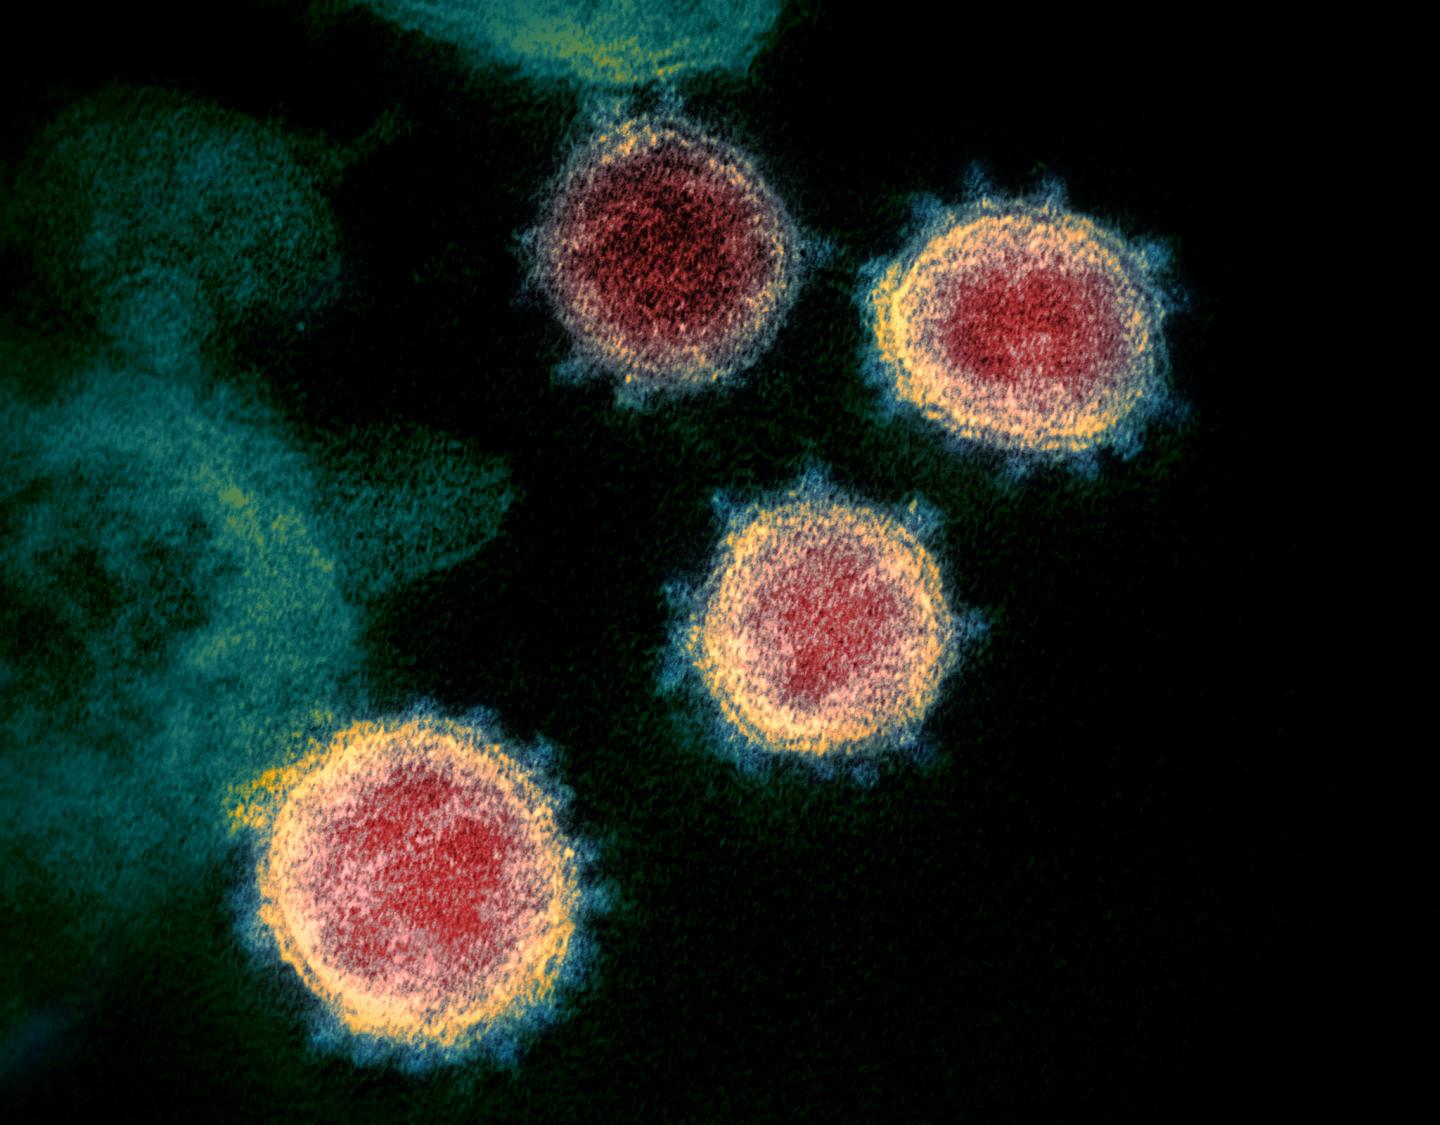 SARS-CoV-2 virus particles emerging from the surface of cells